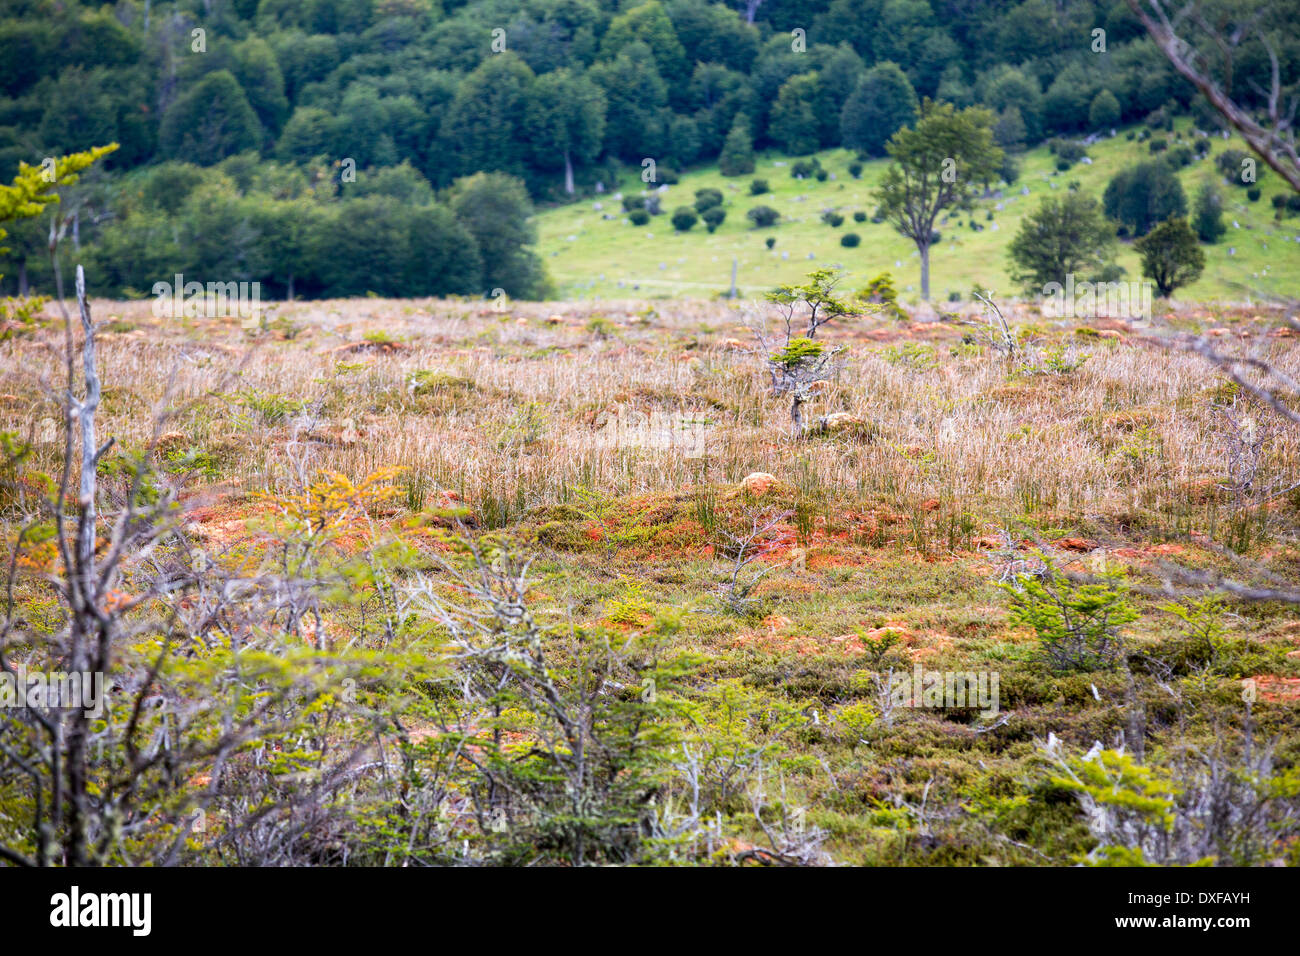 A raised bog in the Martial mountains above Ushuaia which is the capital of Tierra del Fuego, in Argentina. Stock Photo